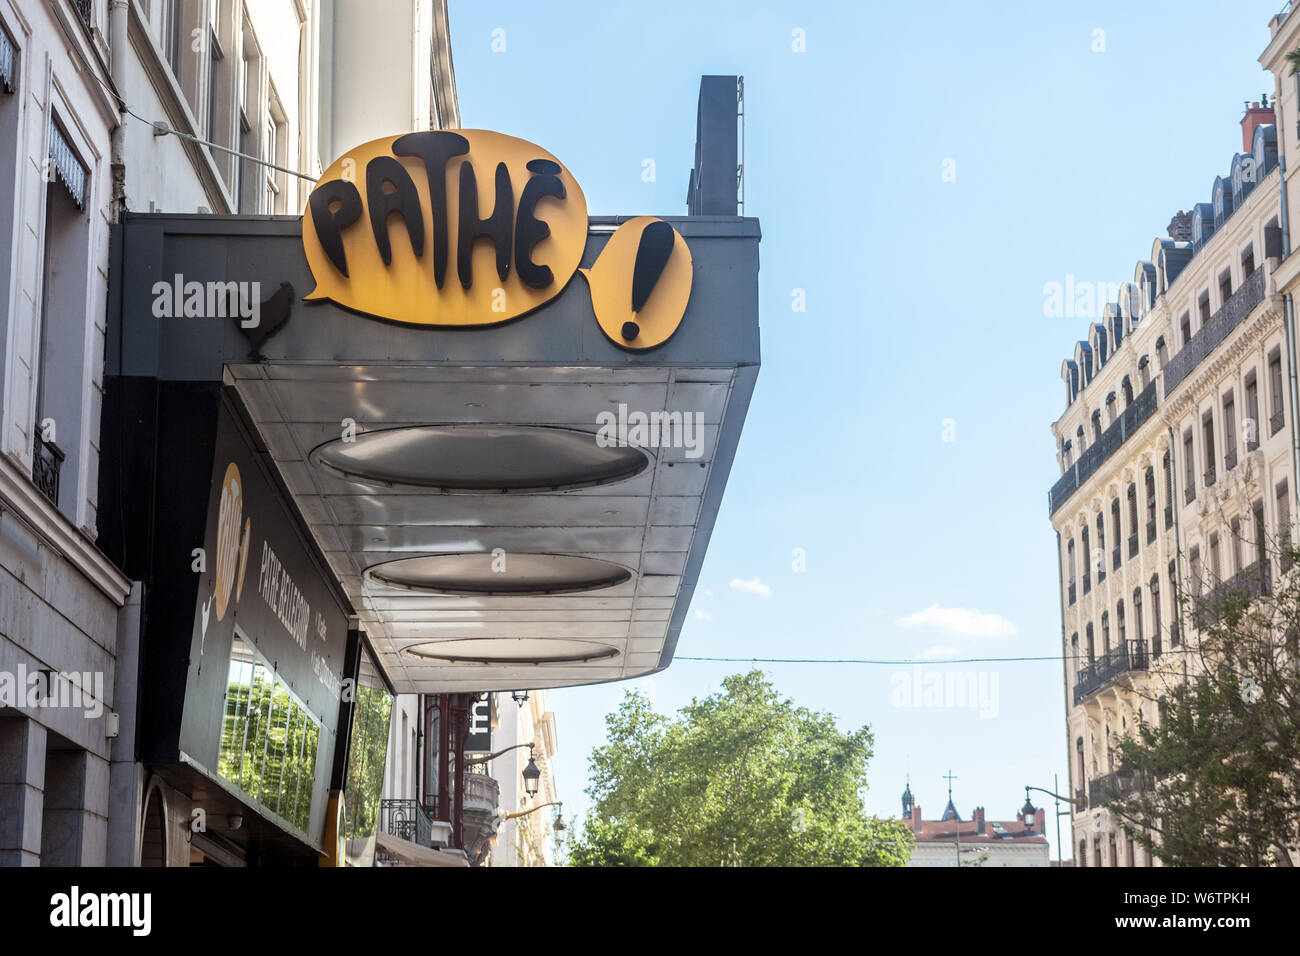 LYON, FRANCE - JULY 13, 2019: Logo of Pathe Gaumon on their local cinema in downtown Lyon. Pathe is a brand of cinema as well as a film producer and d Stock Photo